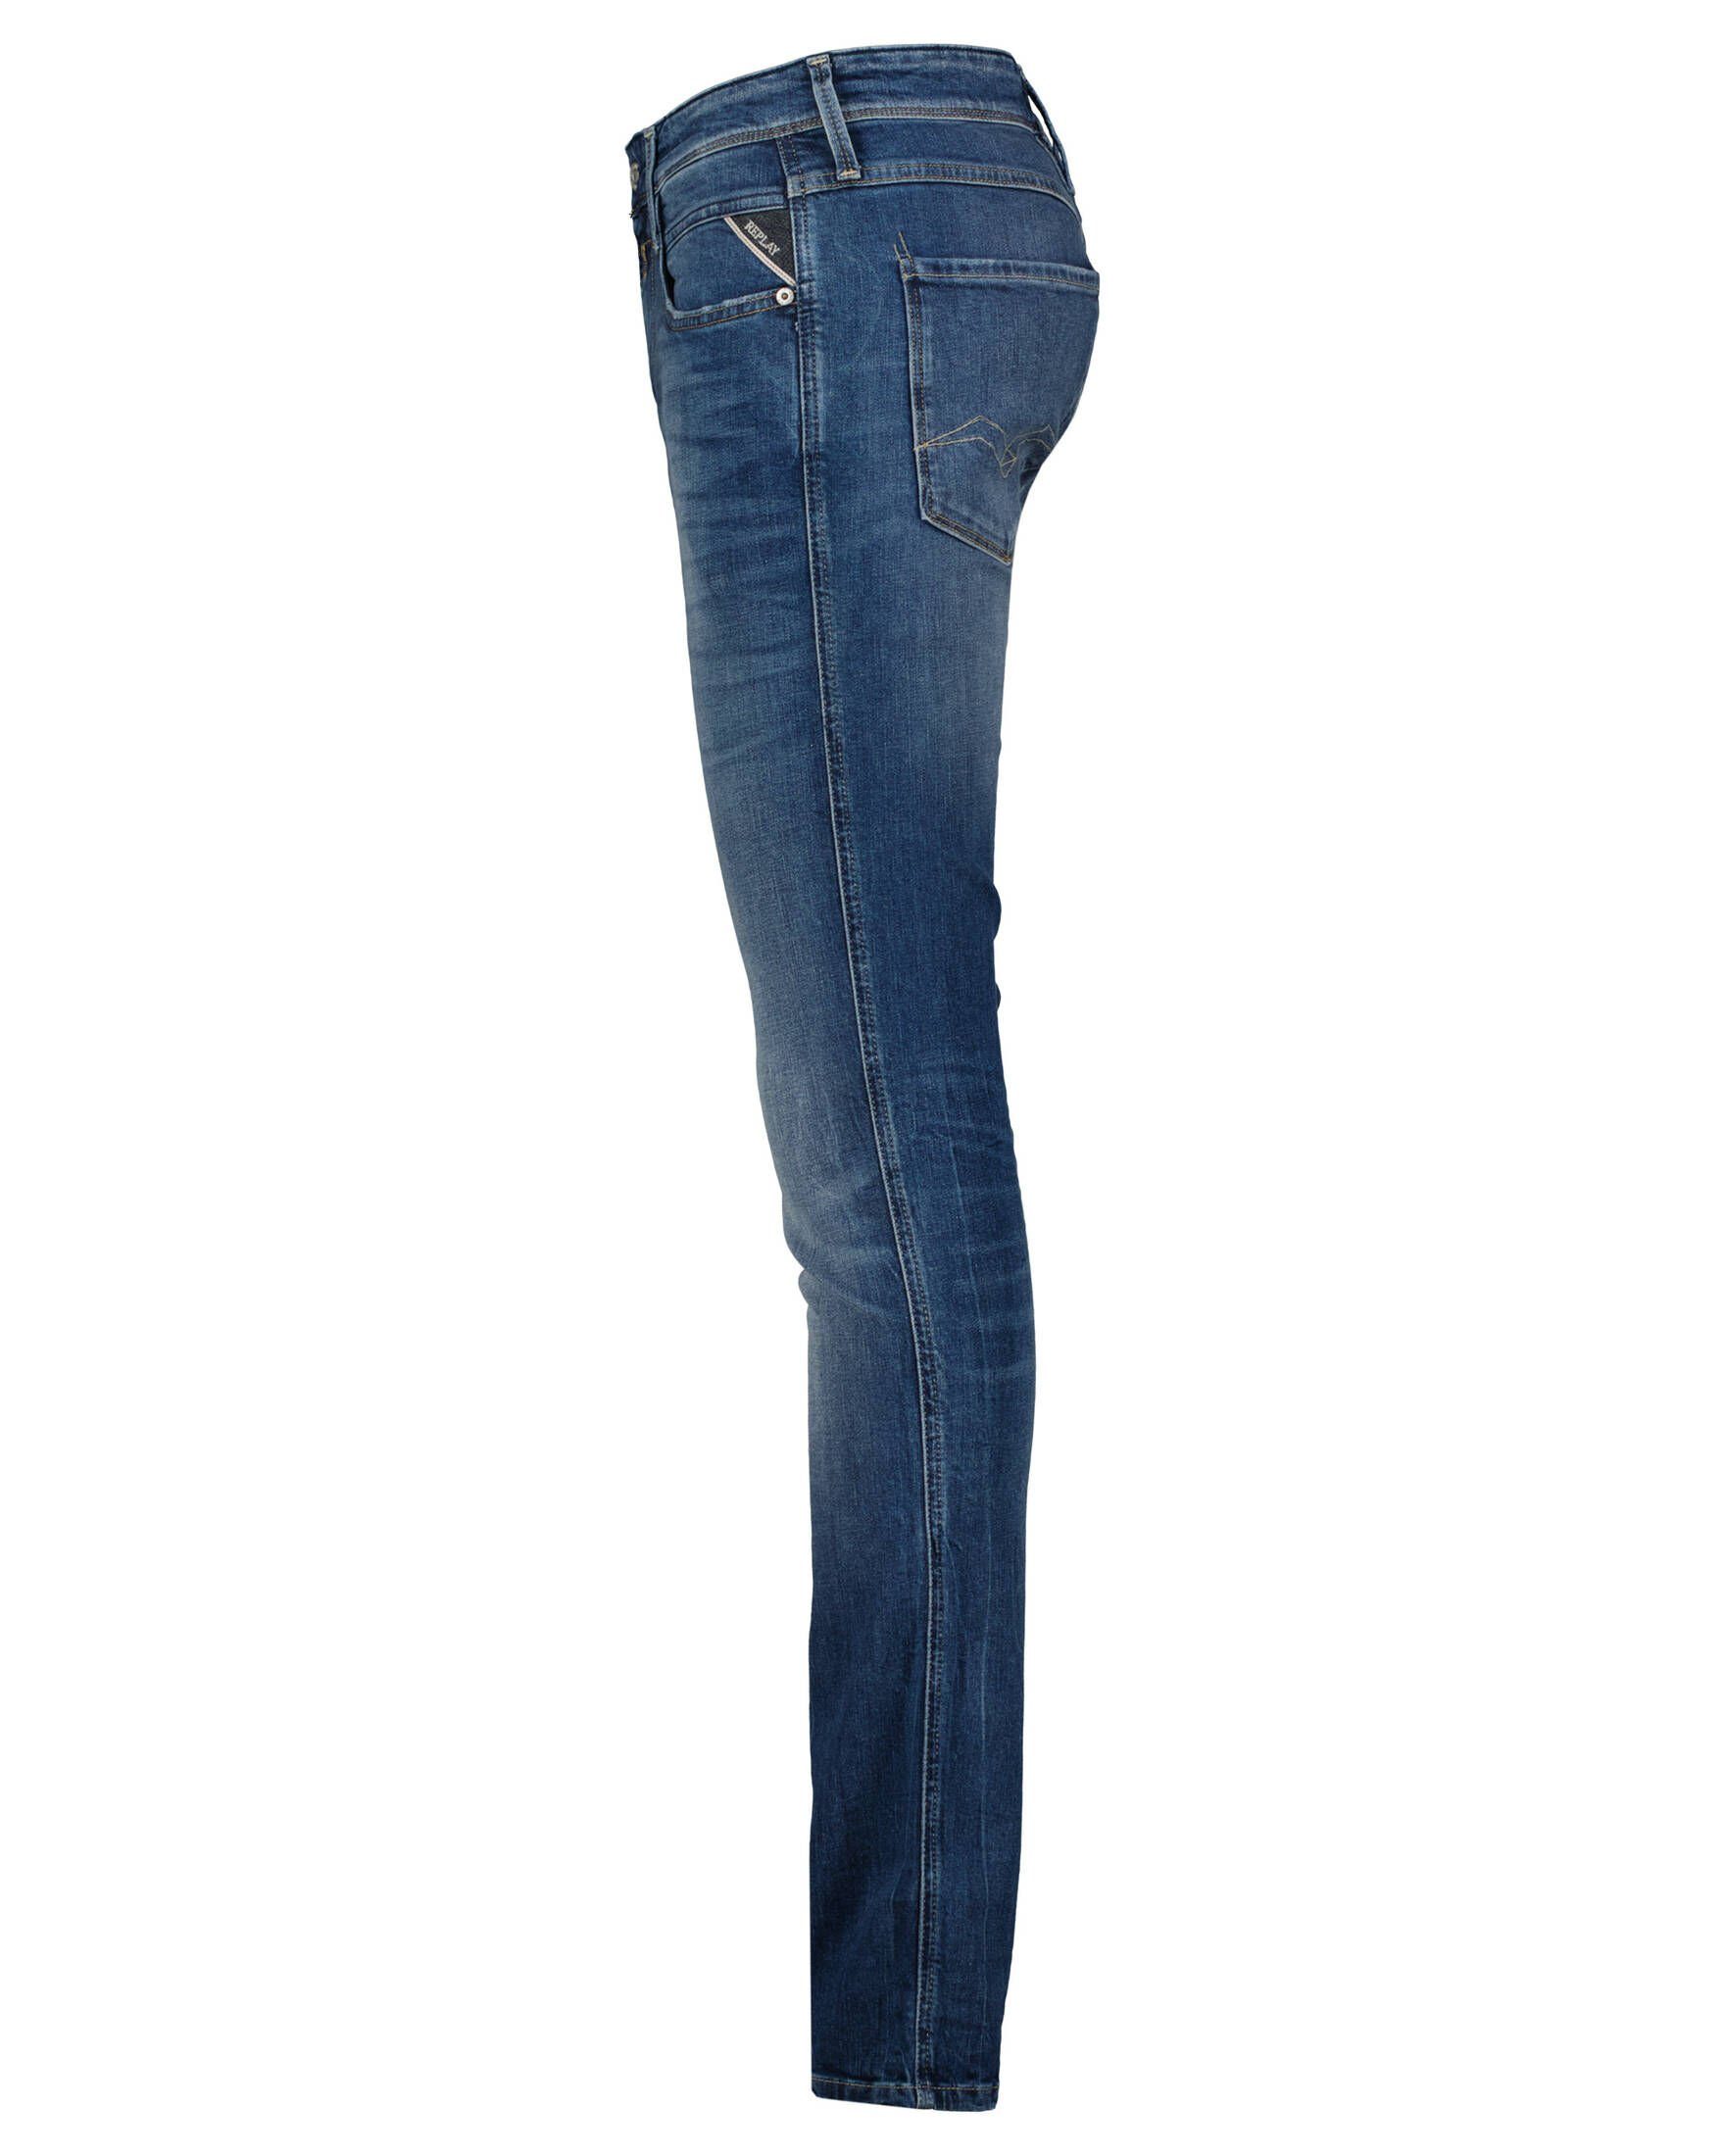 (1-tlg) Skinny Jeans Herren Fit ANBASS Replay 5-Pocket-Jeans